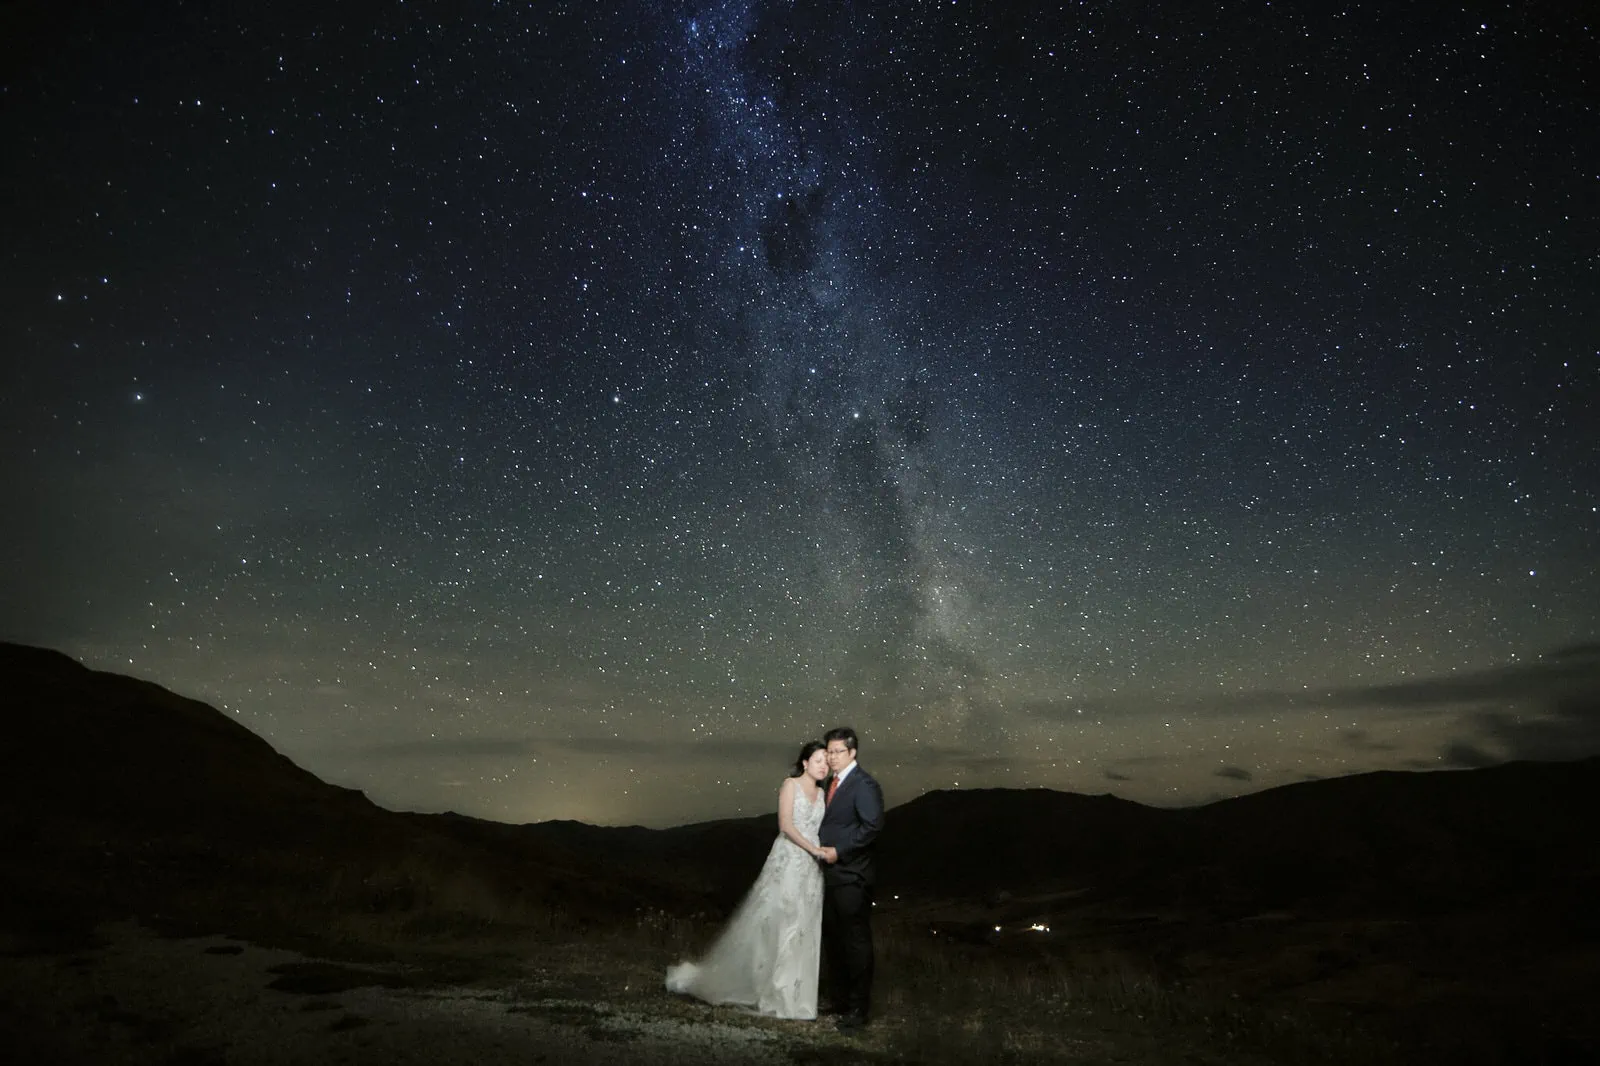 Queenstown New Zealand Elopement Wedding Photographer - A bride and groom posing for a Starry Night Shoot under a starry sky.